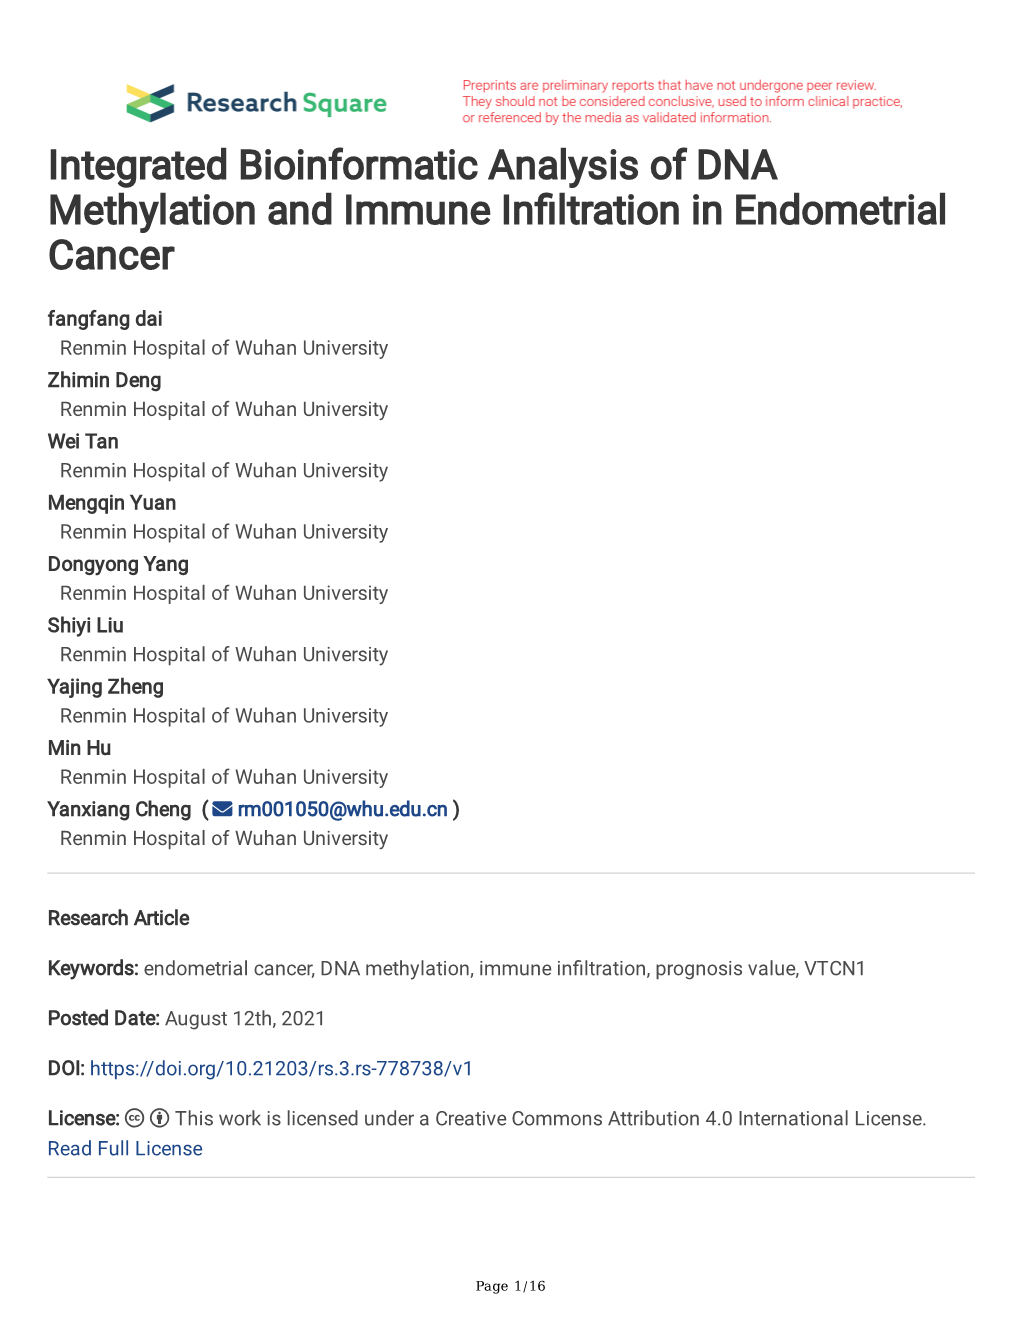 Integrated Bioinformatic Analysis of DNA Methylation and Immune In